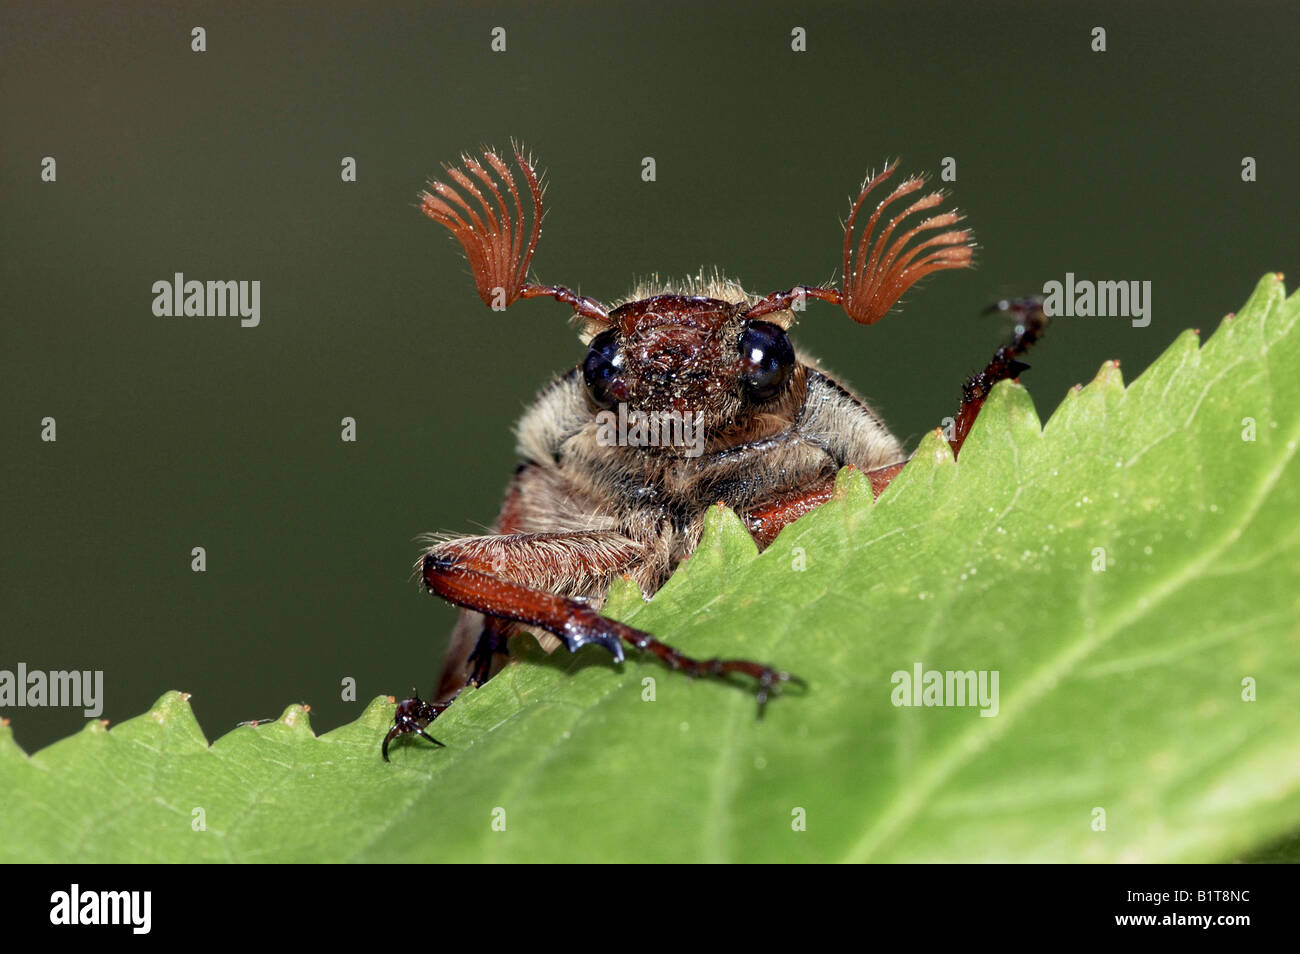 common cockchafer on leaf / Melolontha melolontha Stock Photo